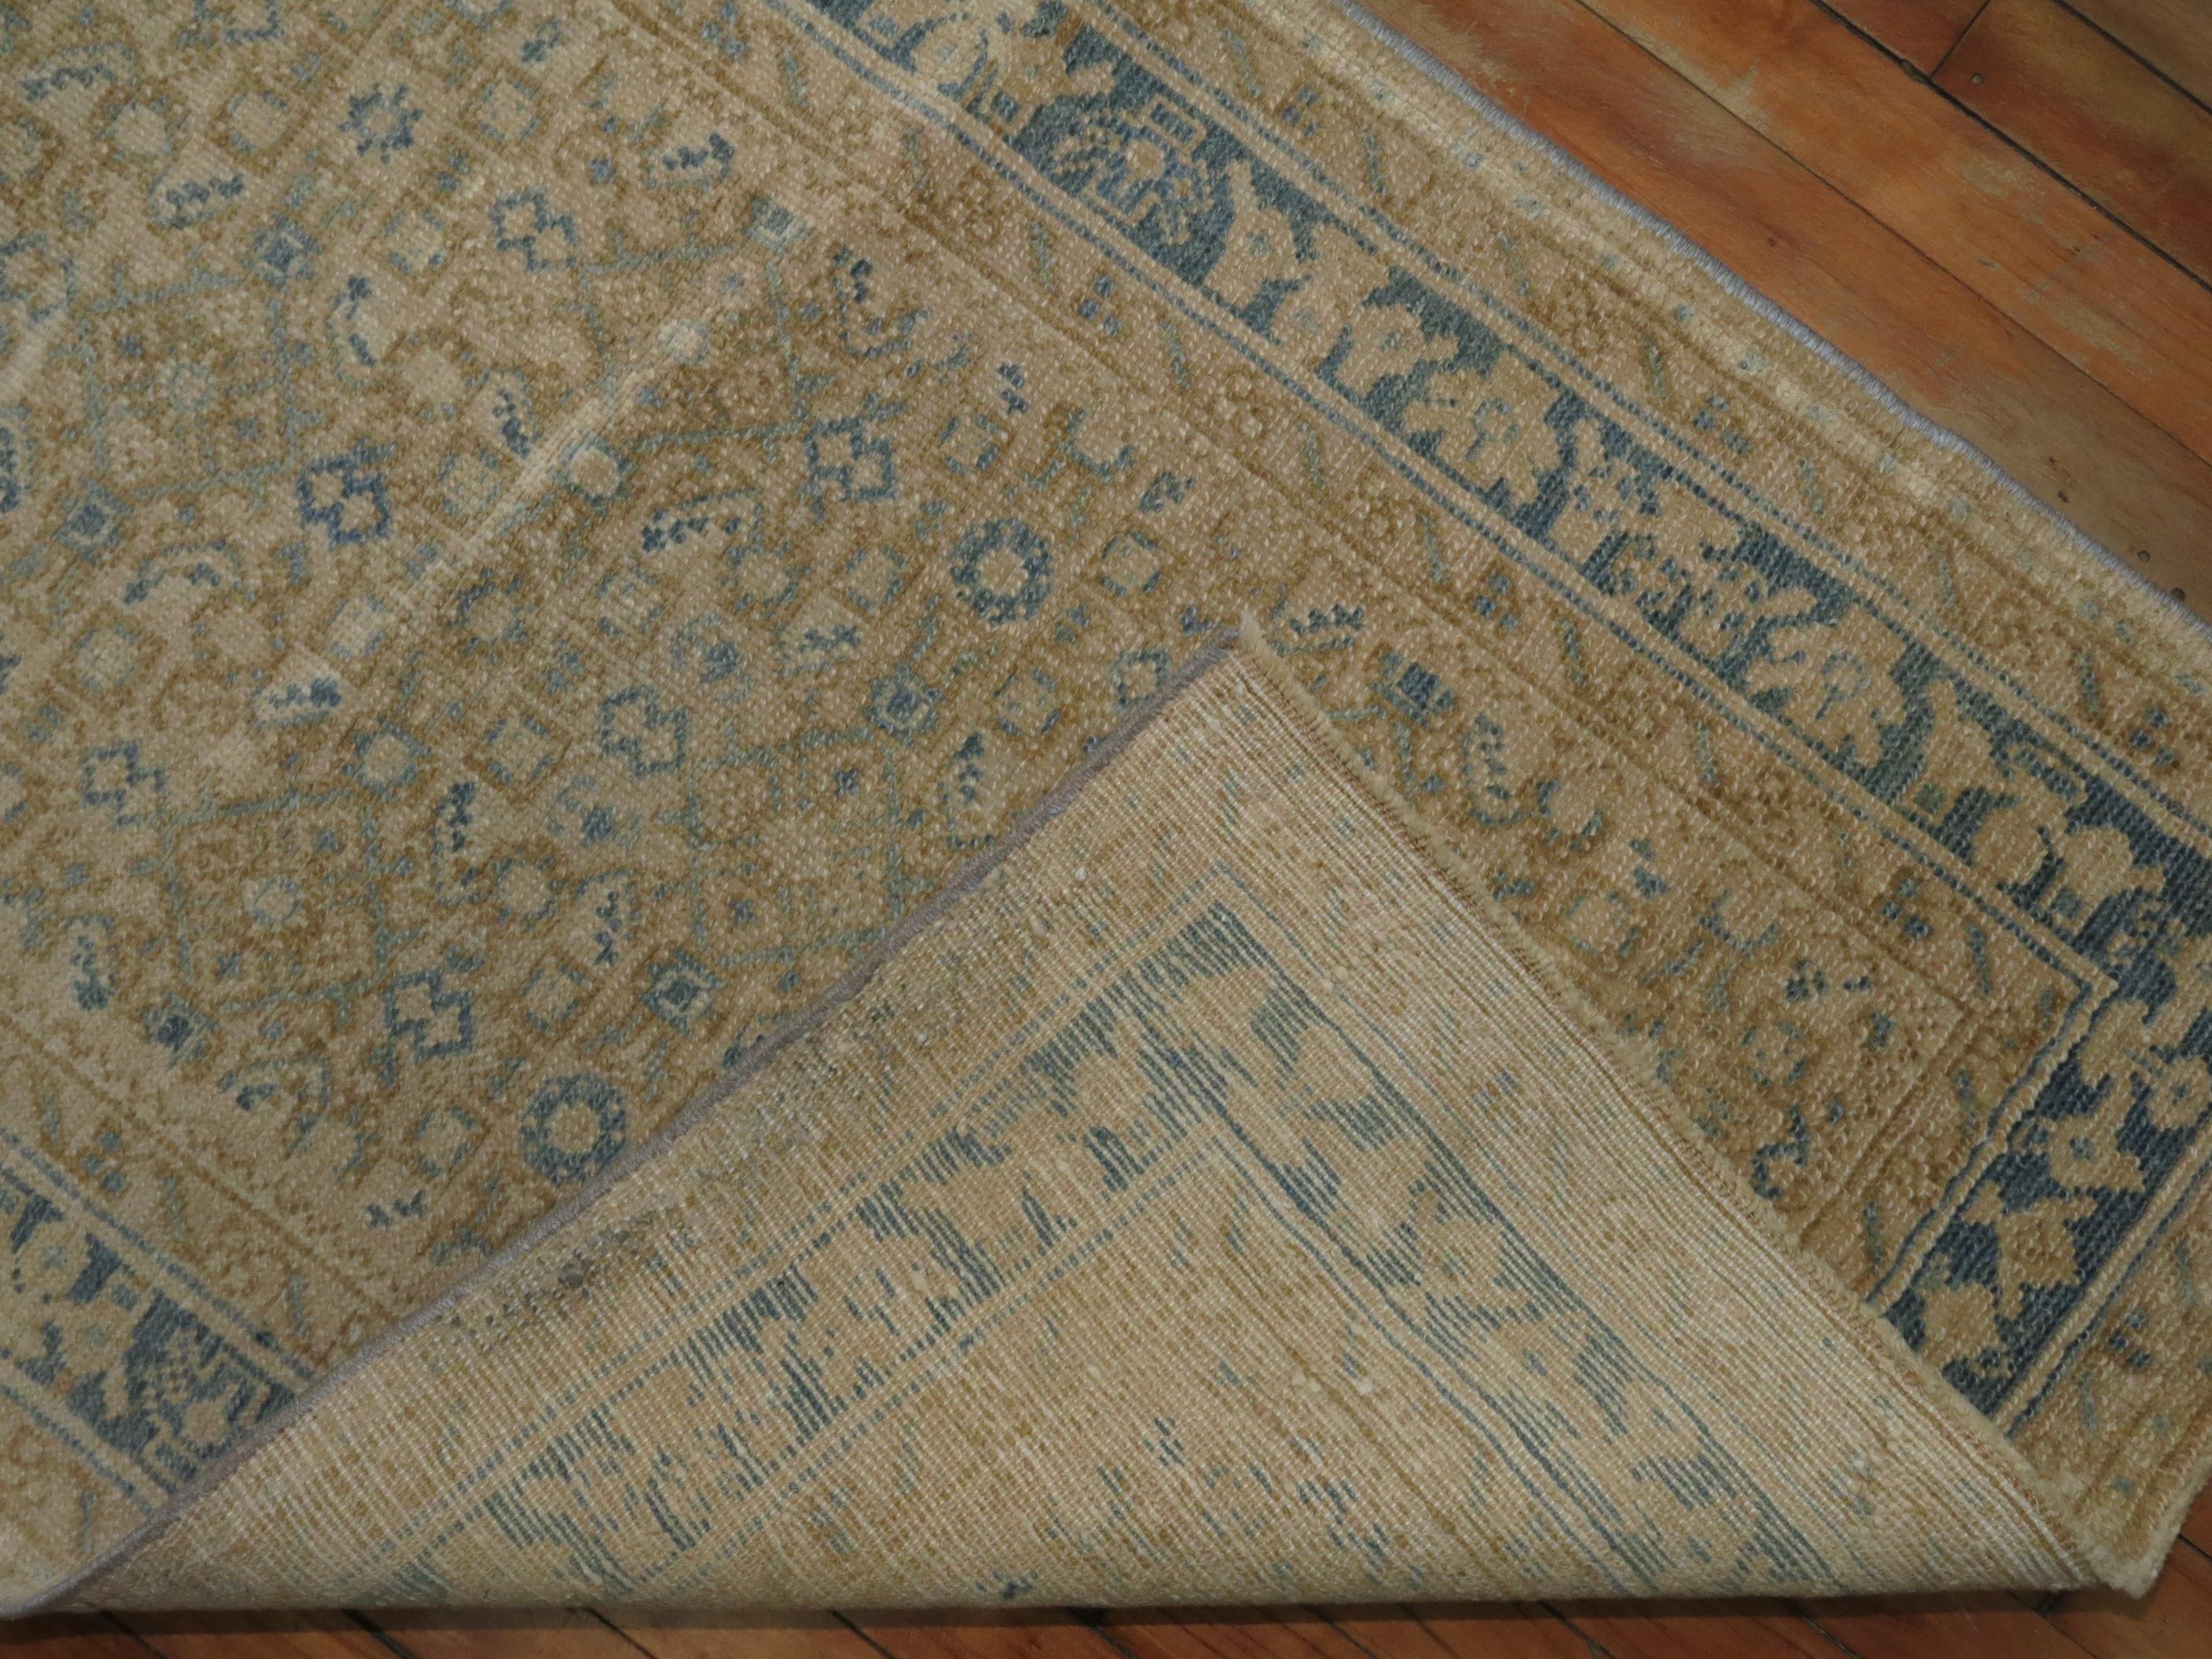 mid 20th century Persian narrow and long runner in sand blue tones. accents in green too

Measures: 2'9